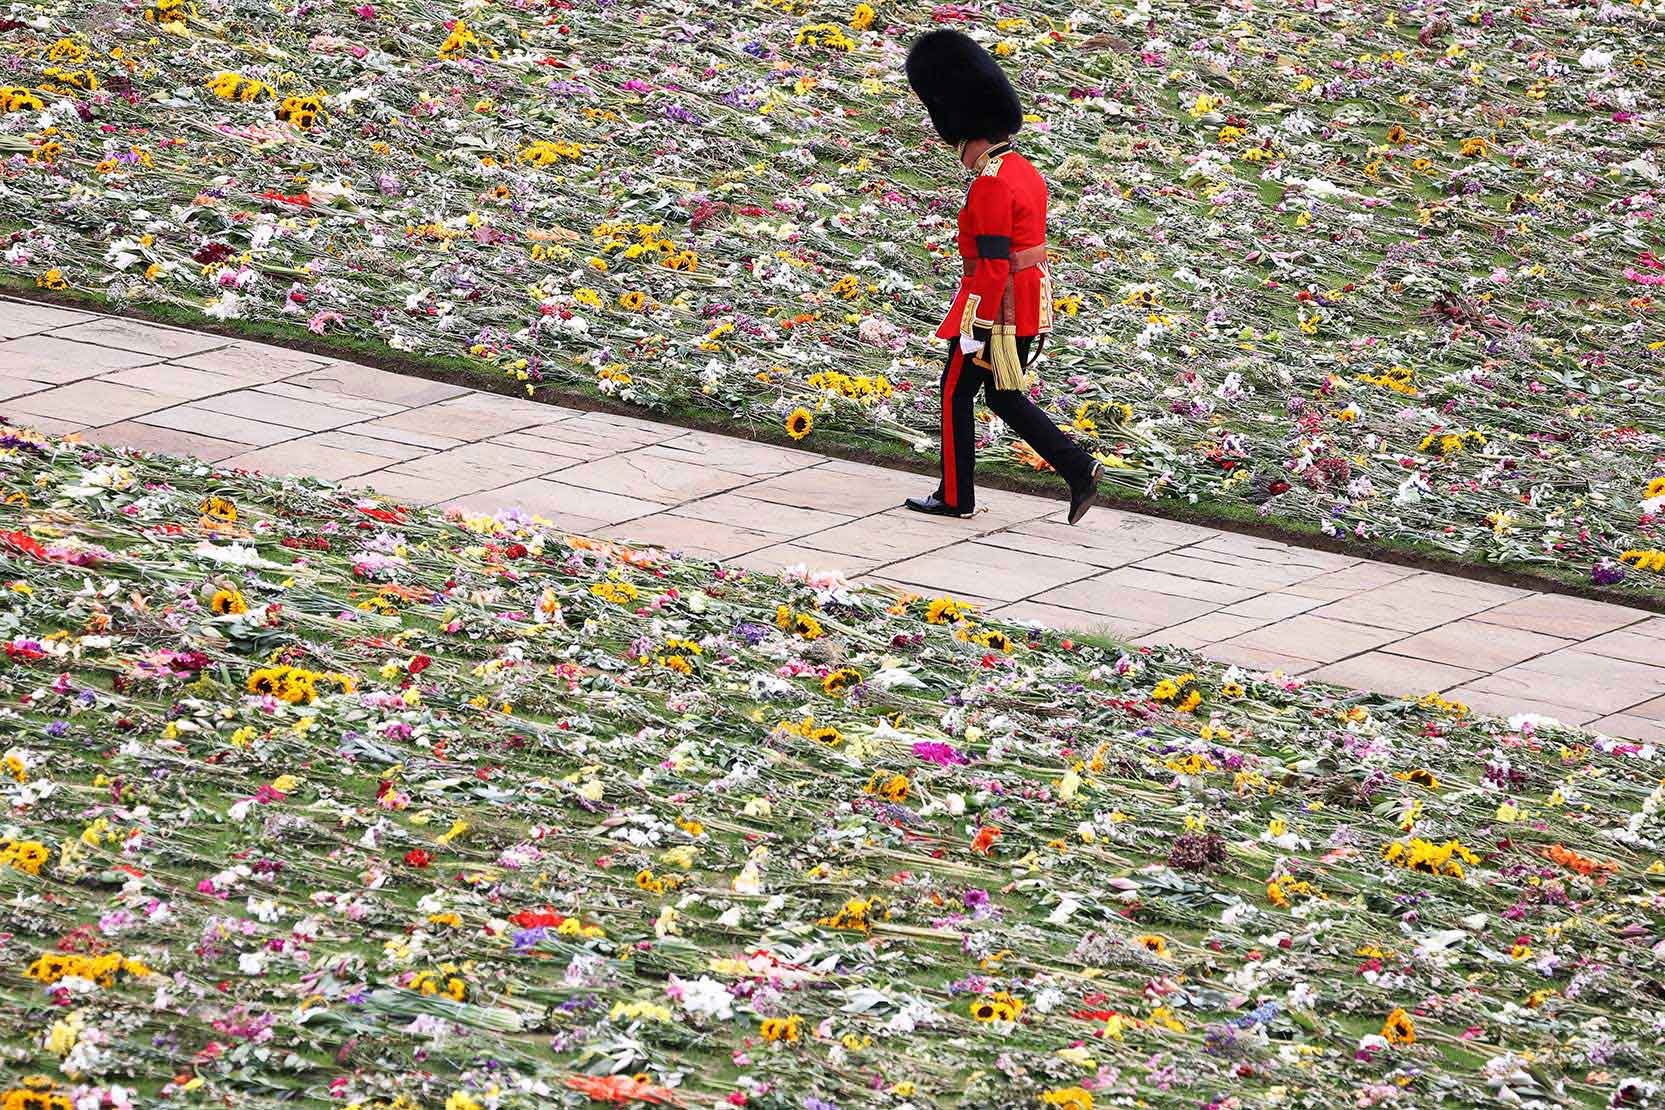 A member of the Coldstream Guards walking past a bed of flowers